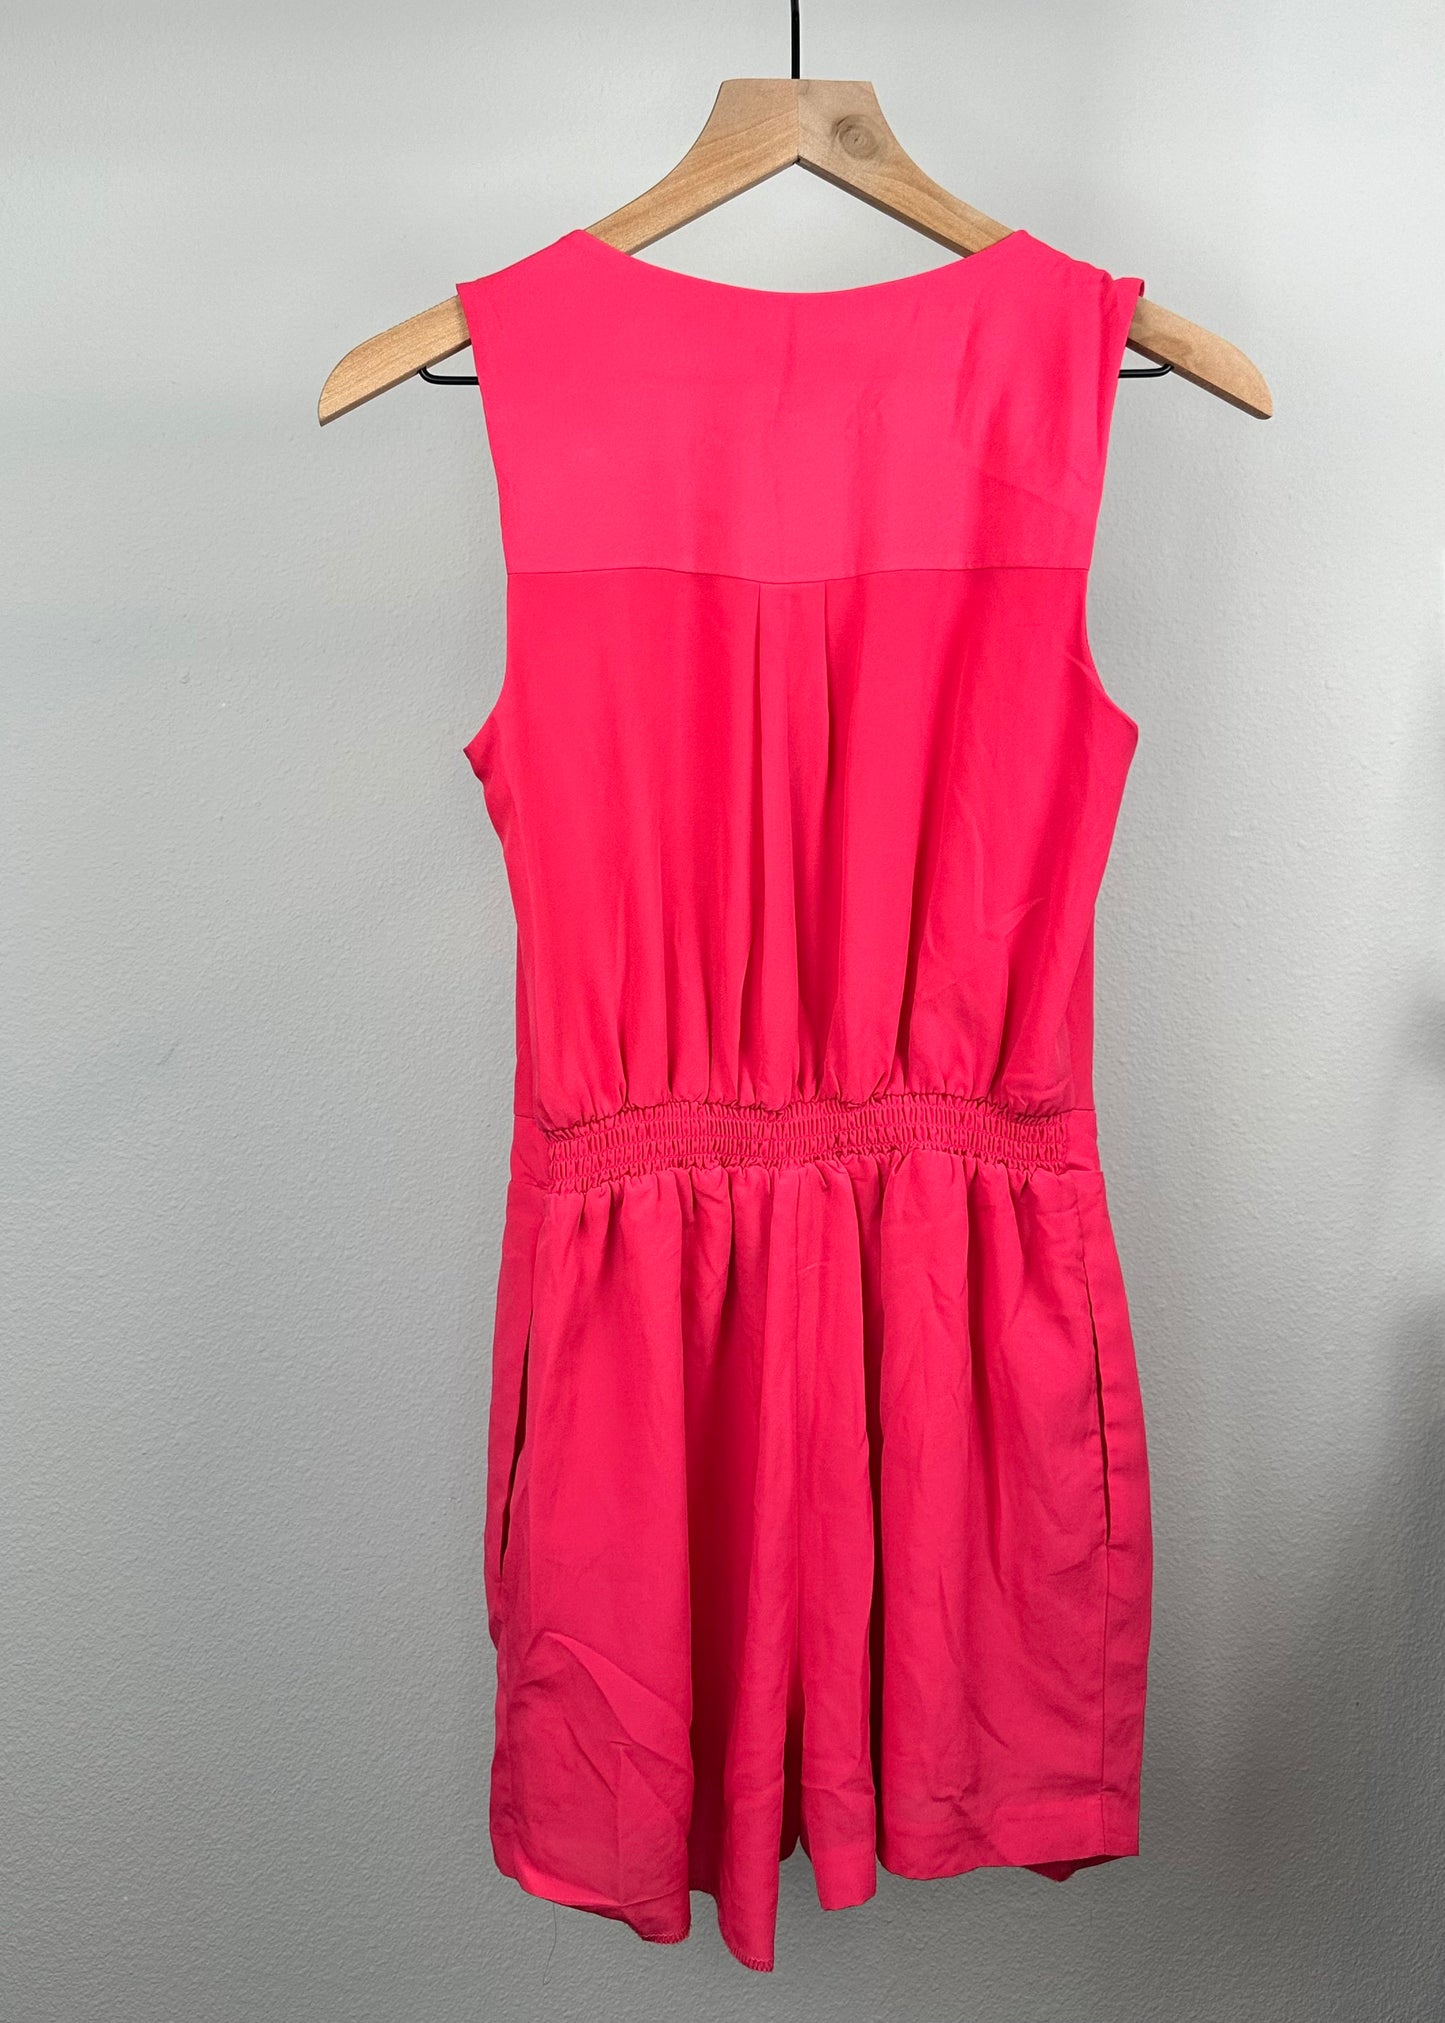 Pink Romper By Express